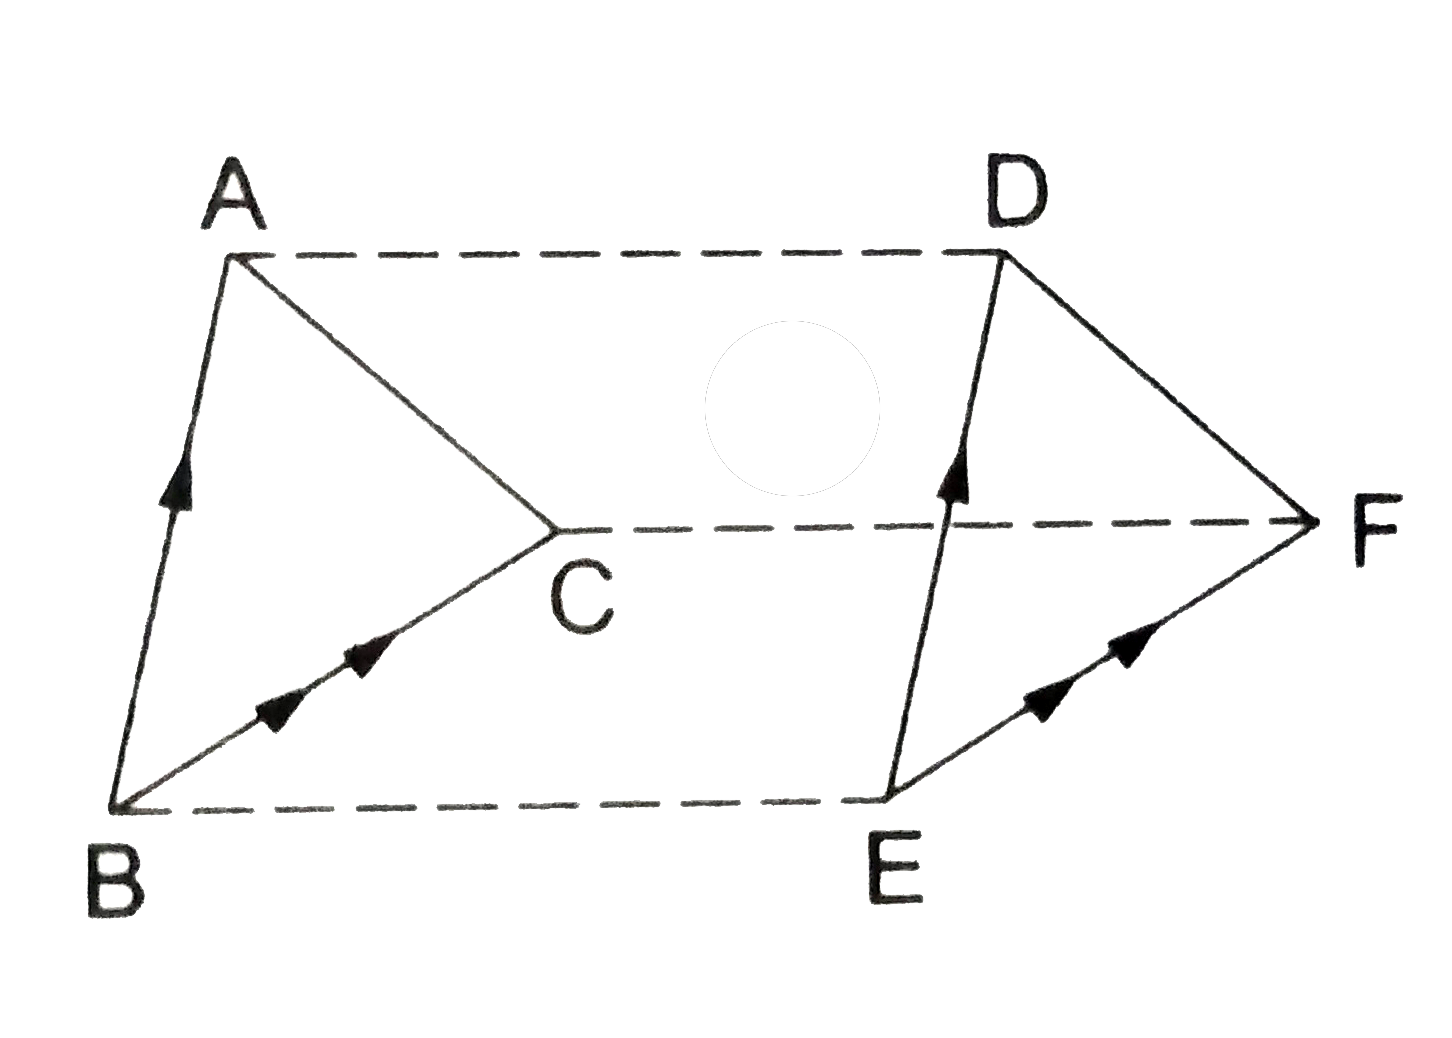 Let triangle ABC and triangle DEF be two triangles given in such a way that AB||DE,  AB = DE, BC||EF and BC = EF.   Prove that   (i) AC||DF and AC = DF,   (ii) triangle ABC ~= triangle DEF.